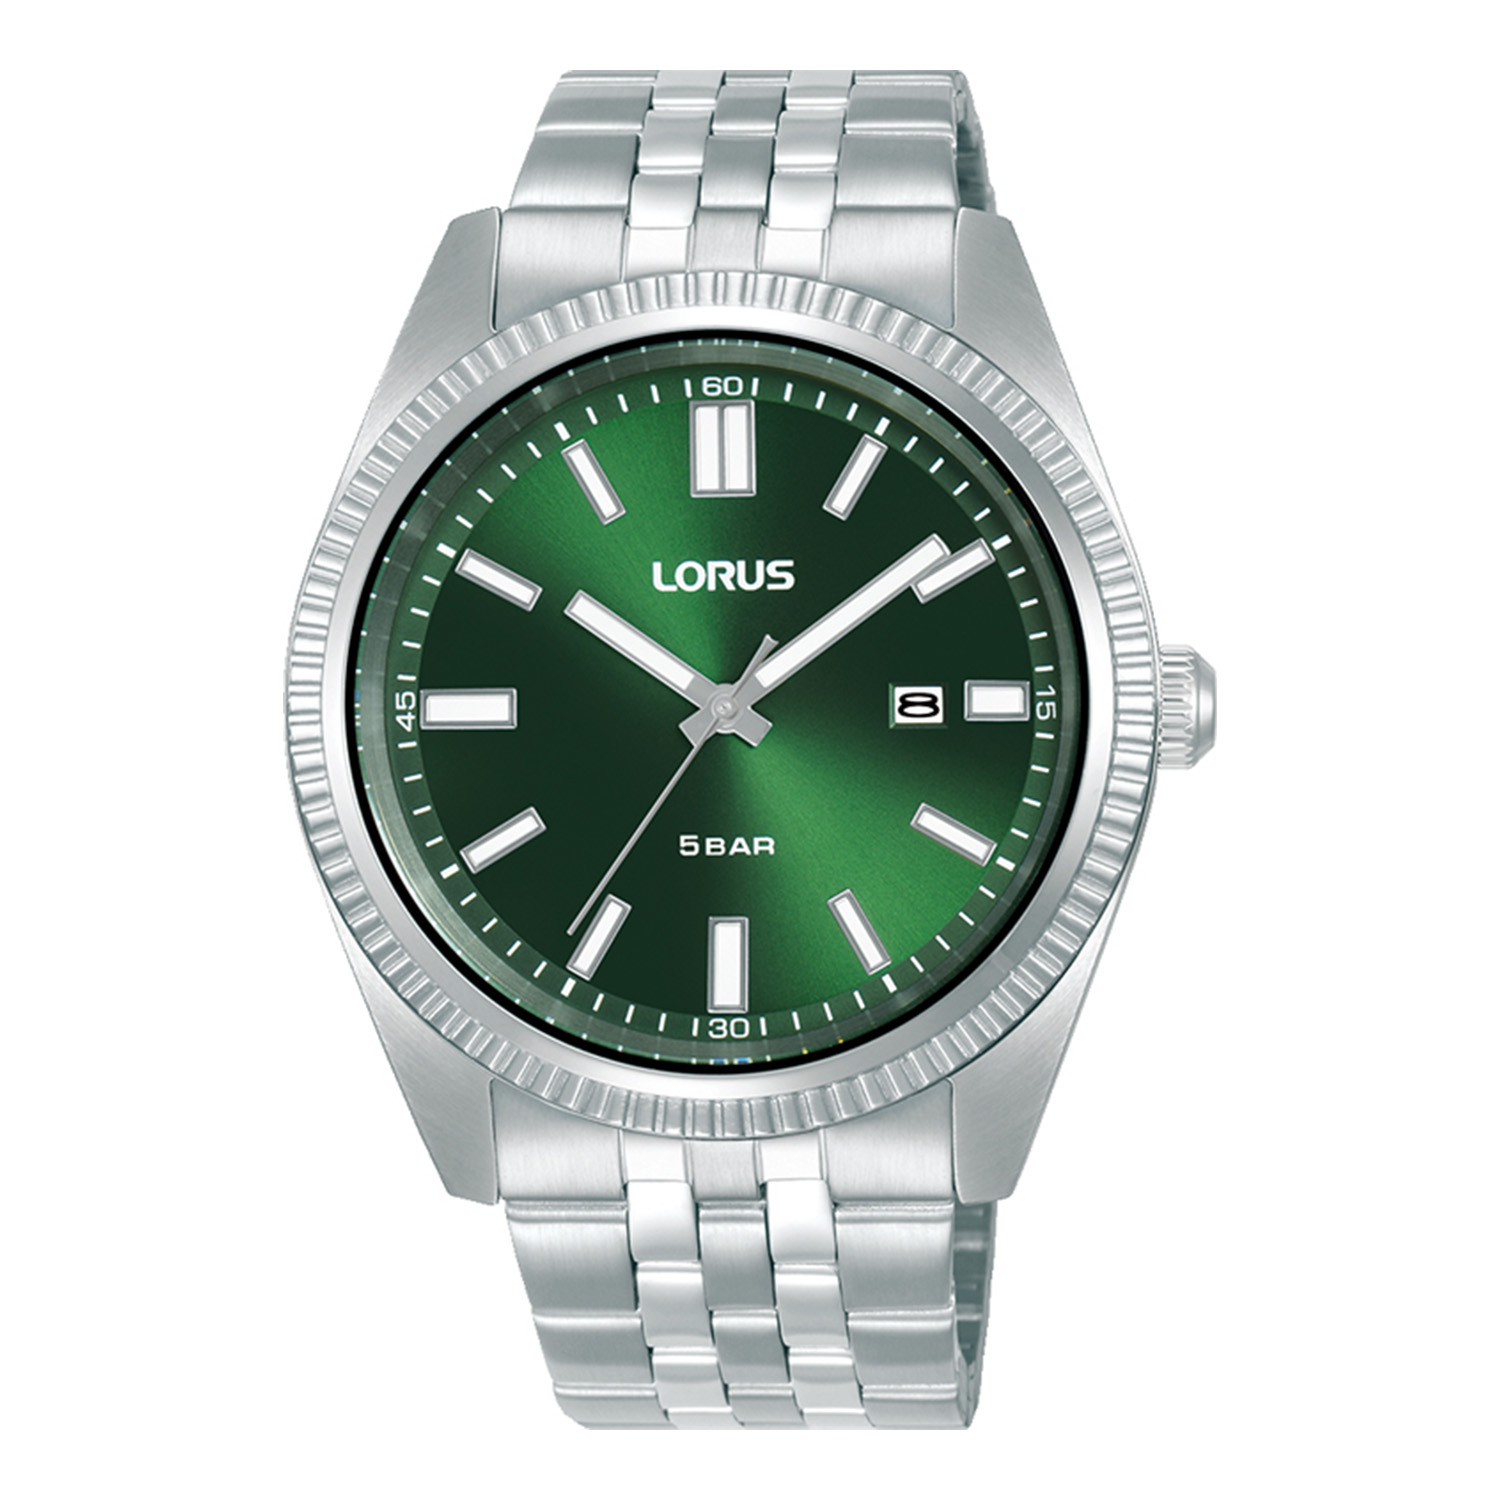 Mens LORUS stainless steel watch with green dial and silver bracelet.